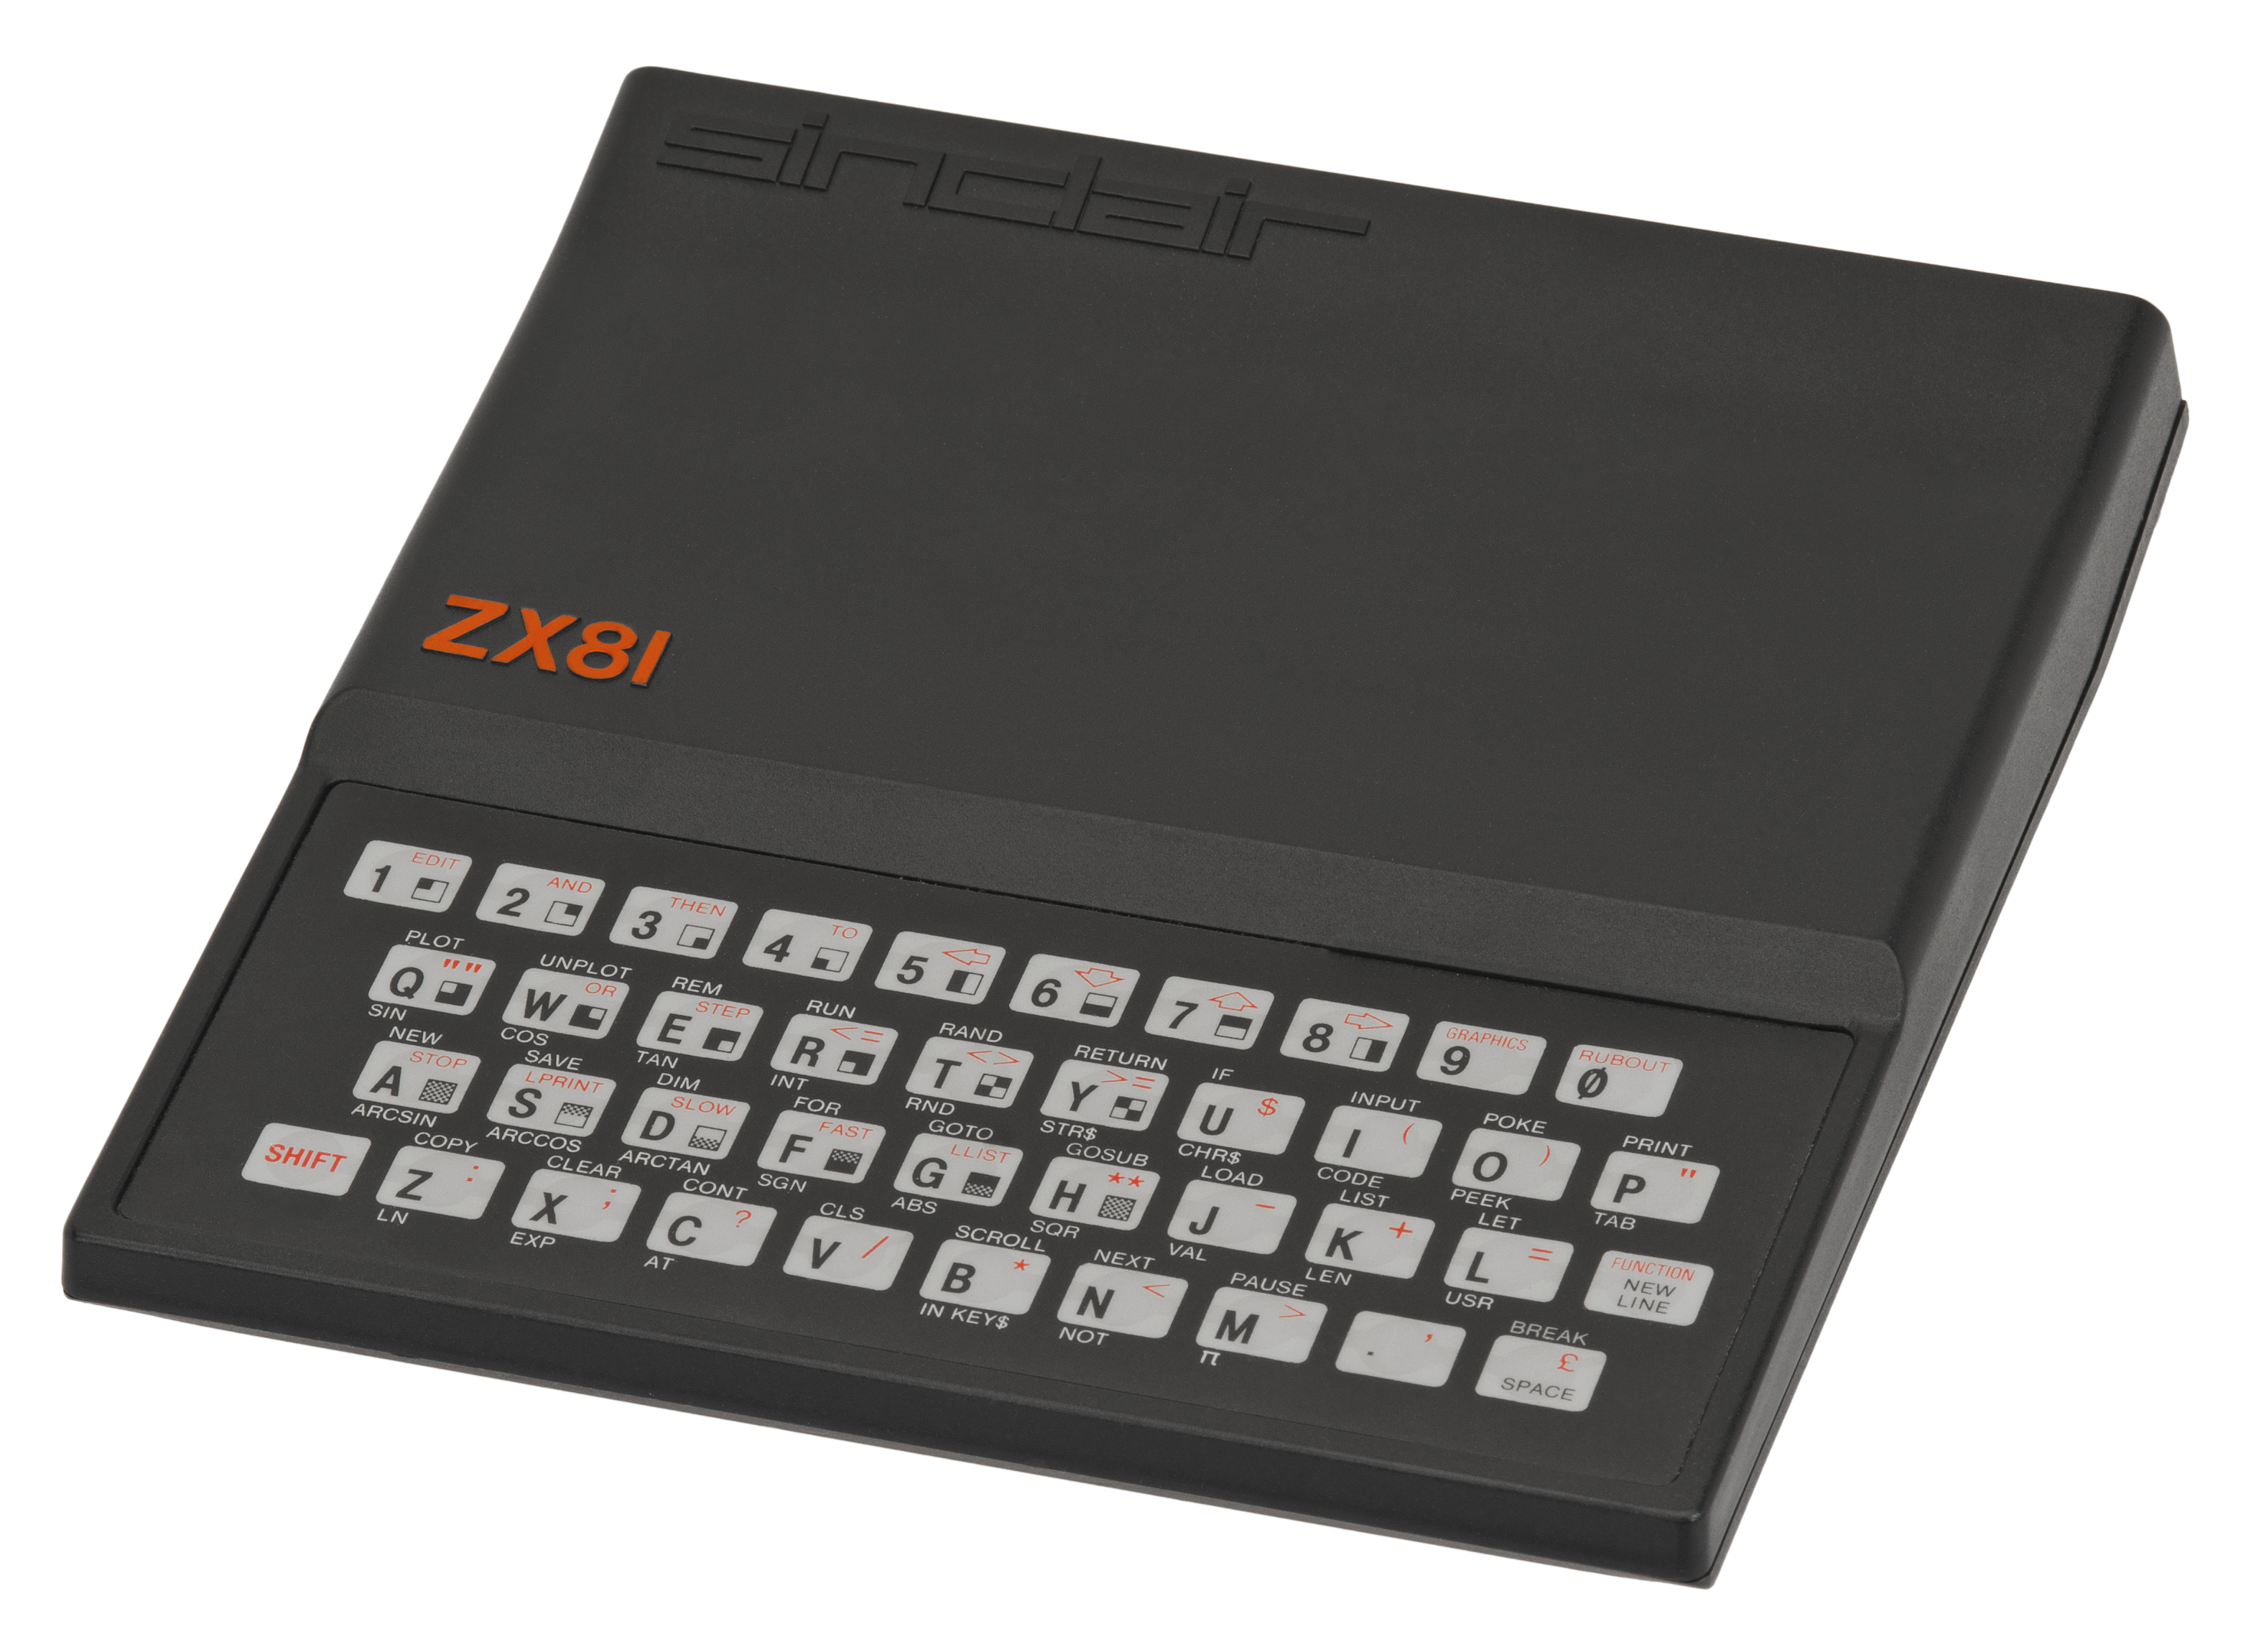 Timex SInclair ZX-81 Personal Computer